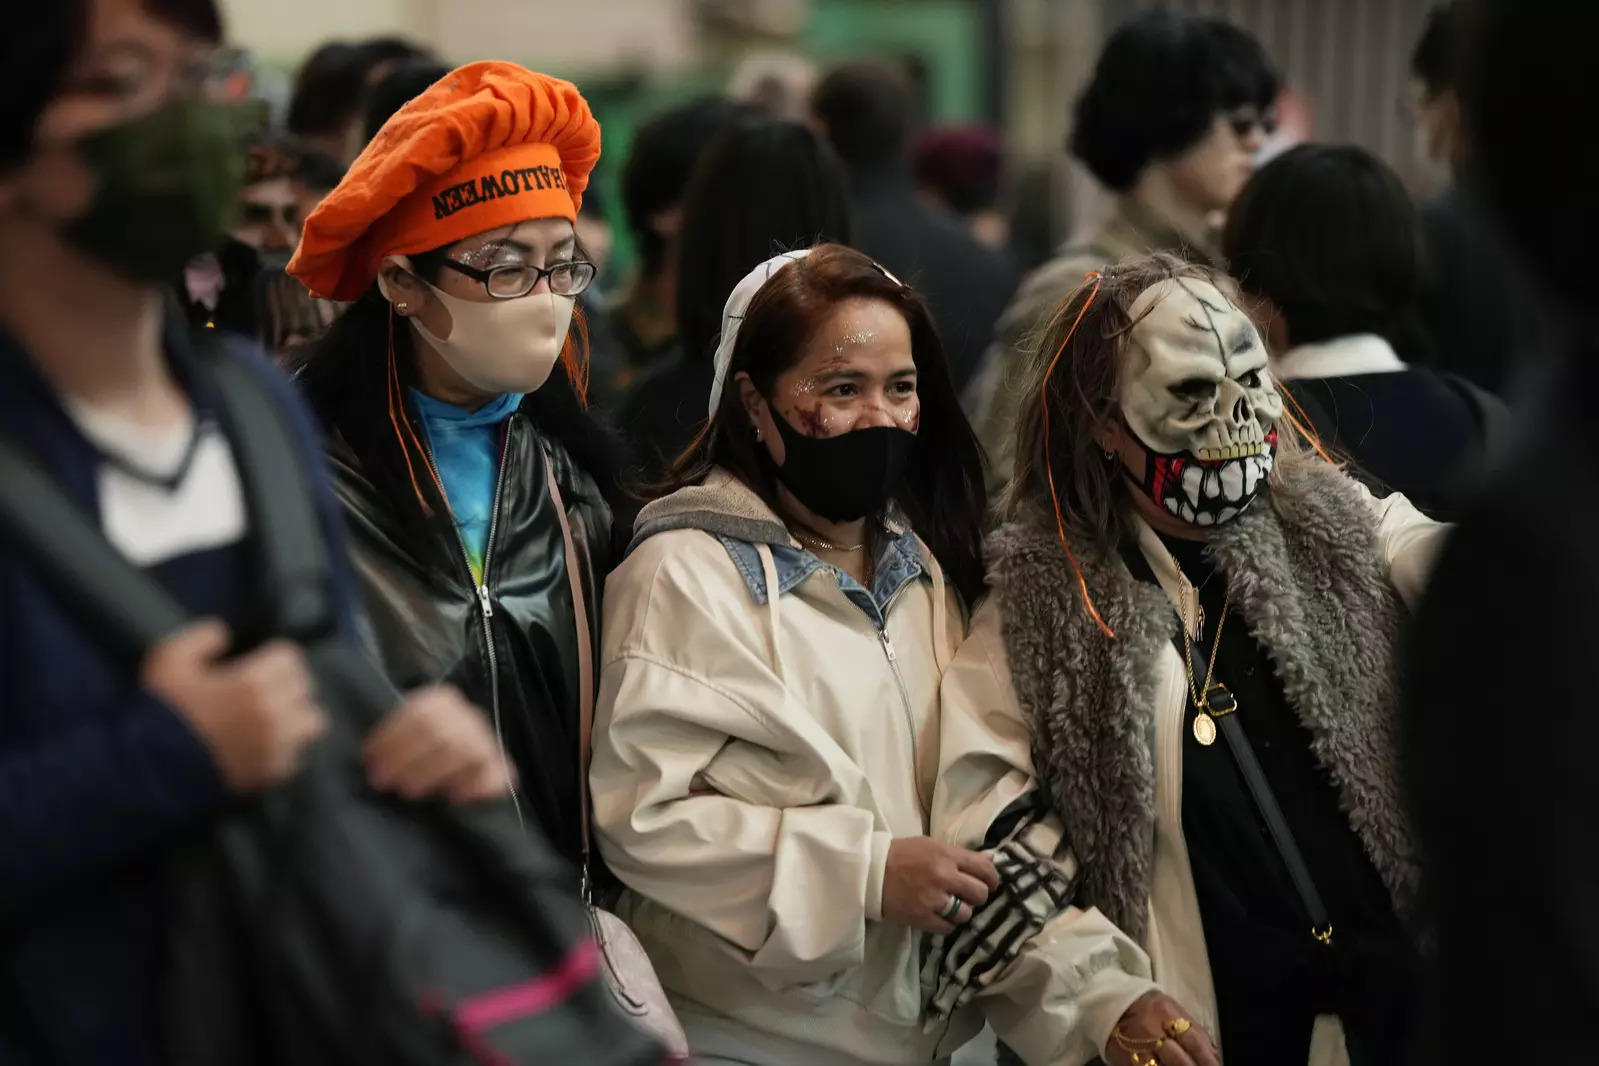 Revelers around the world dress up for Halloween; see pics